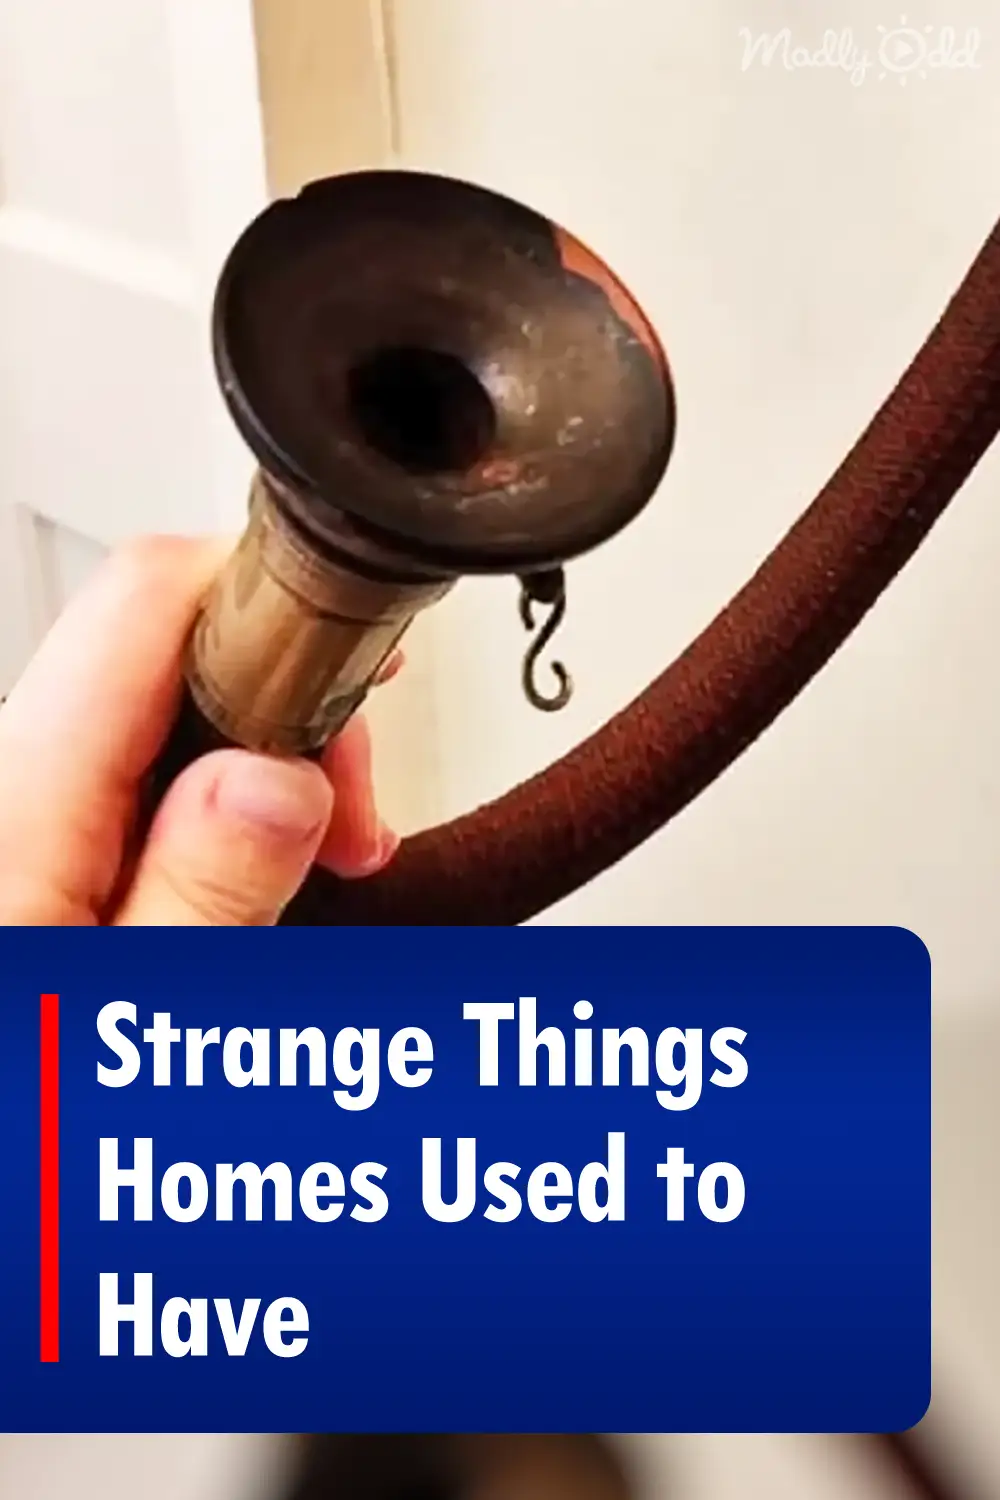 Strange Things Homes Used to Have